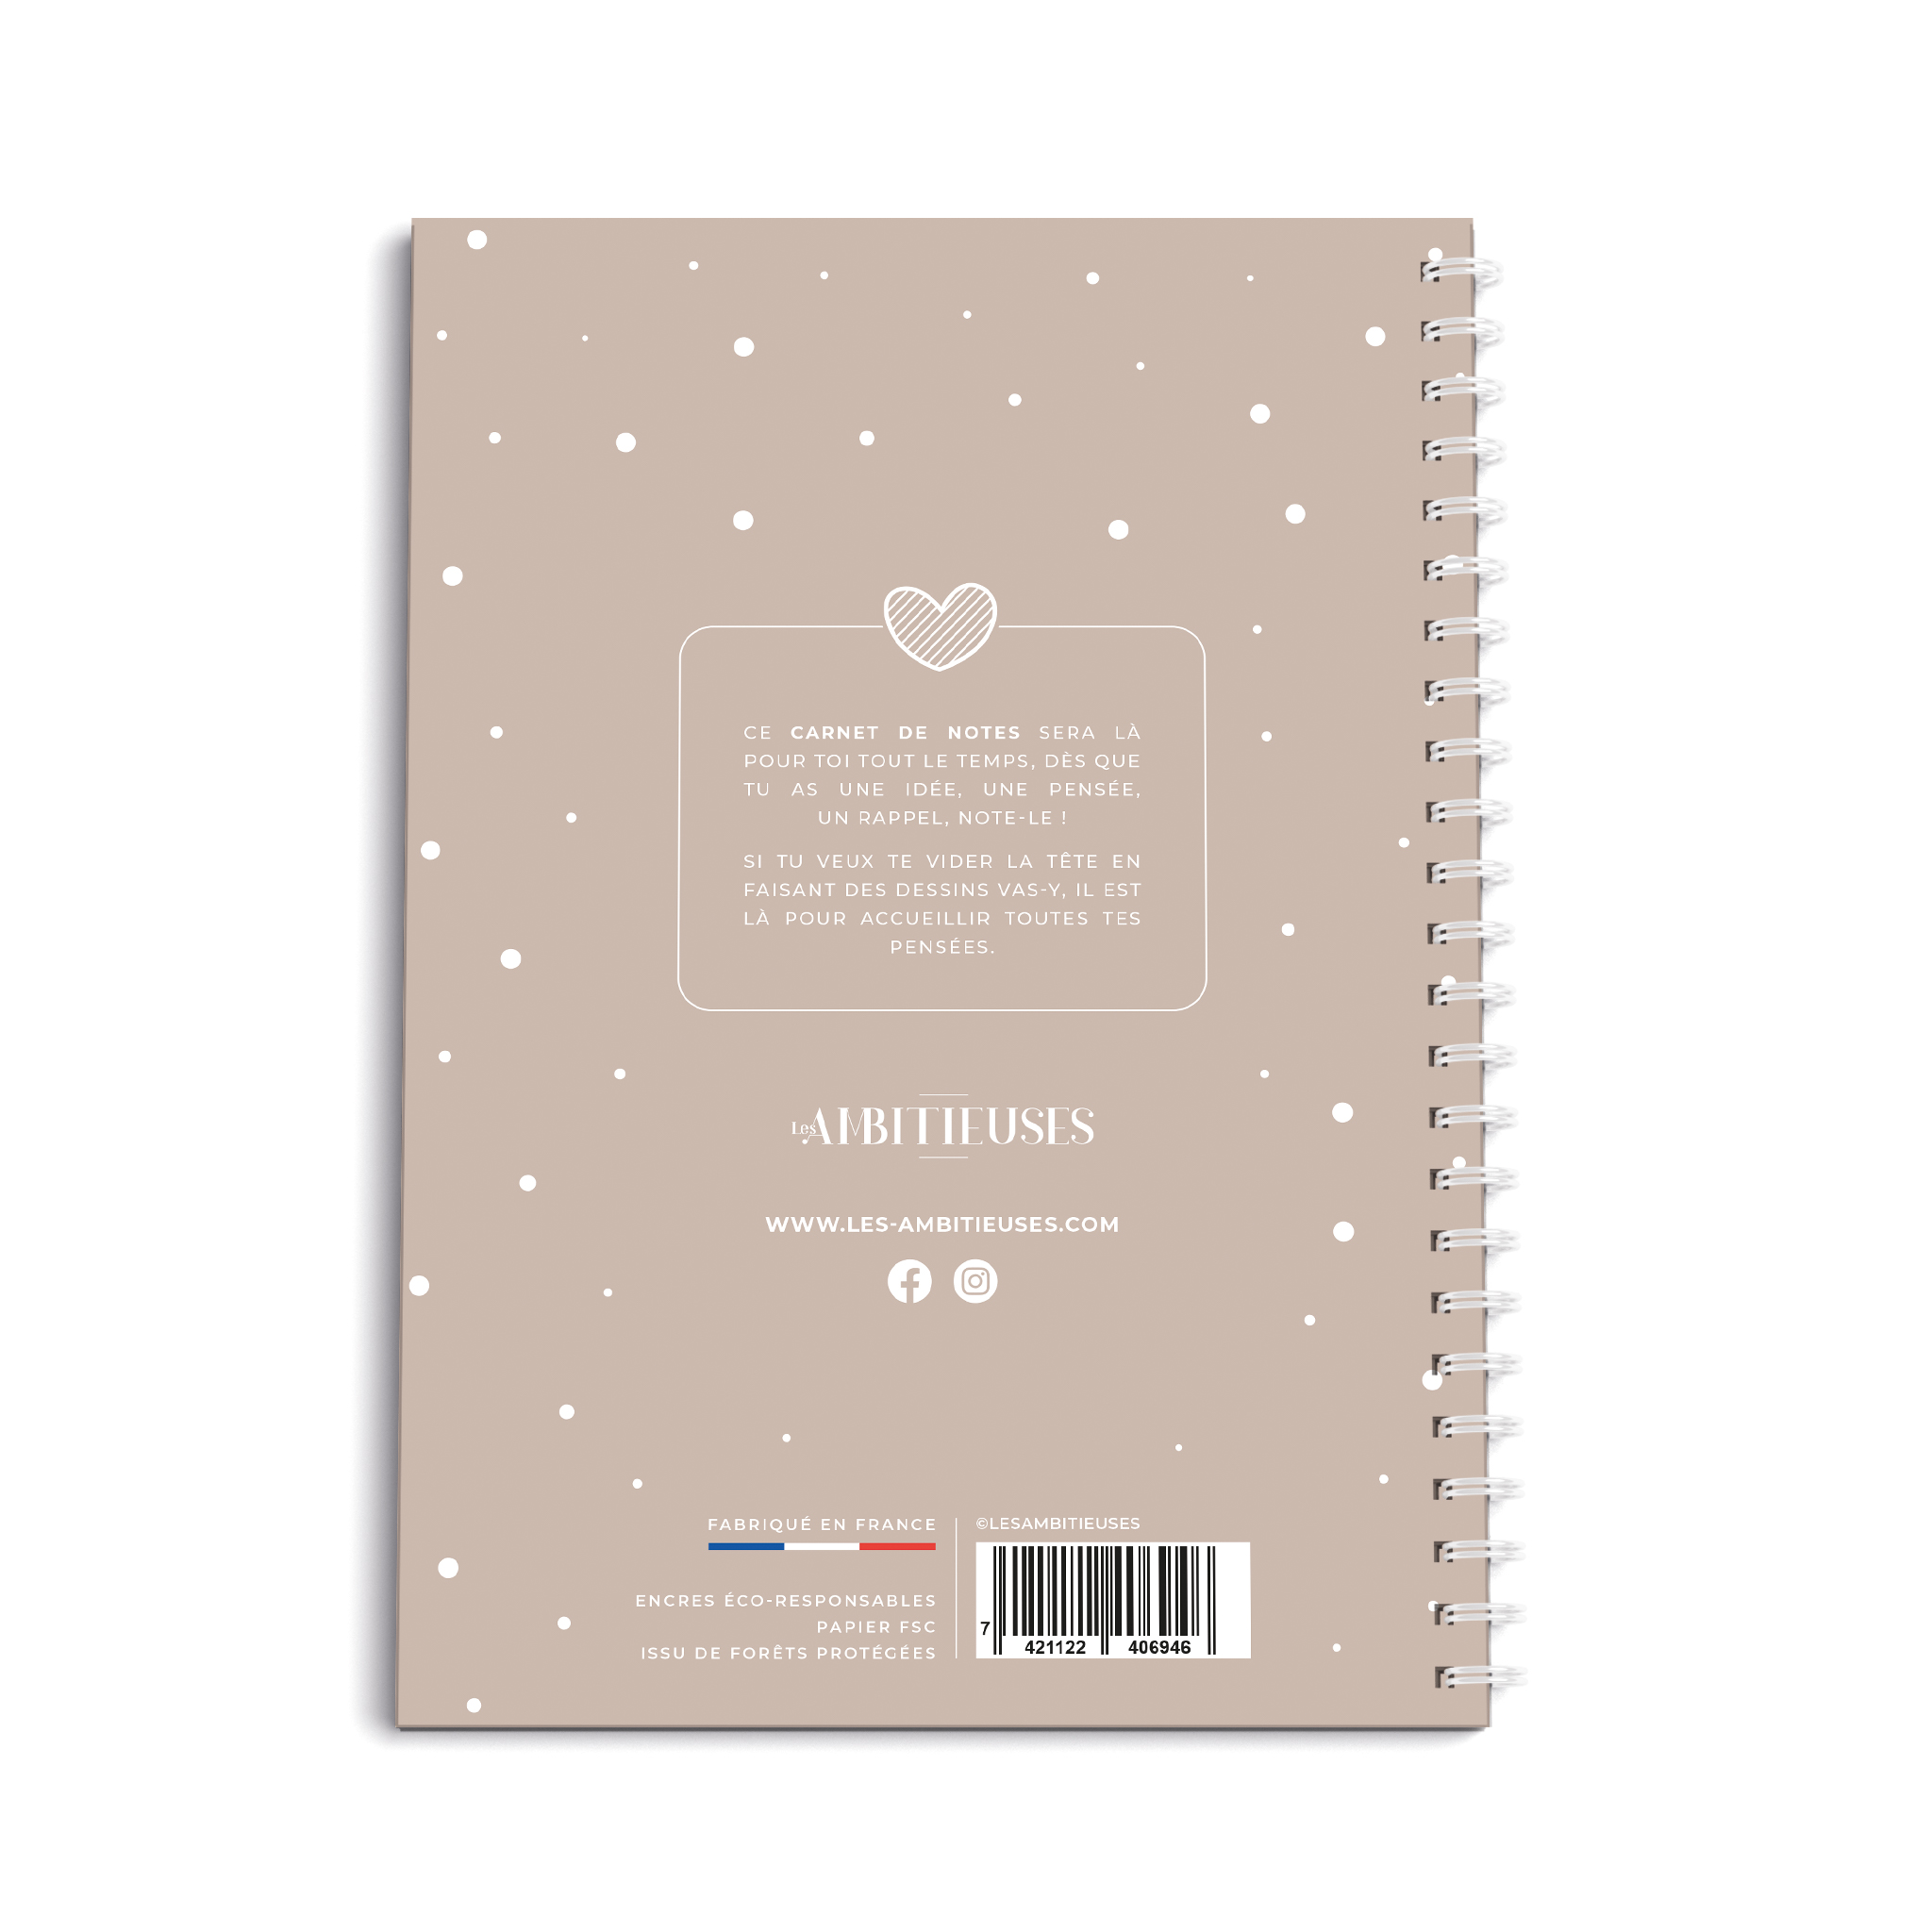 Carnet de notes cocooning taupe verso fond blanc